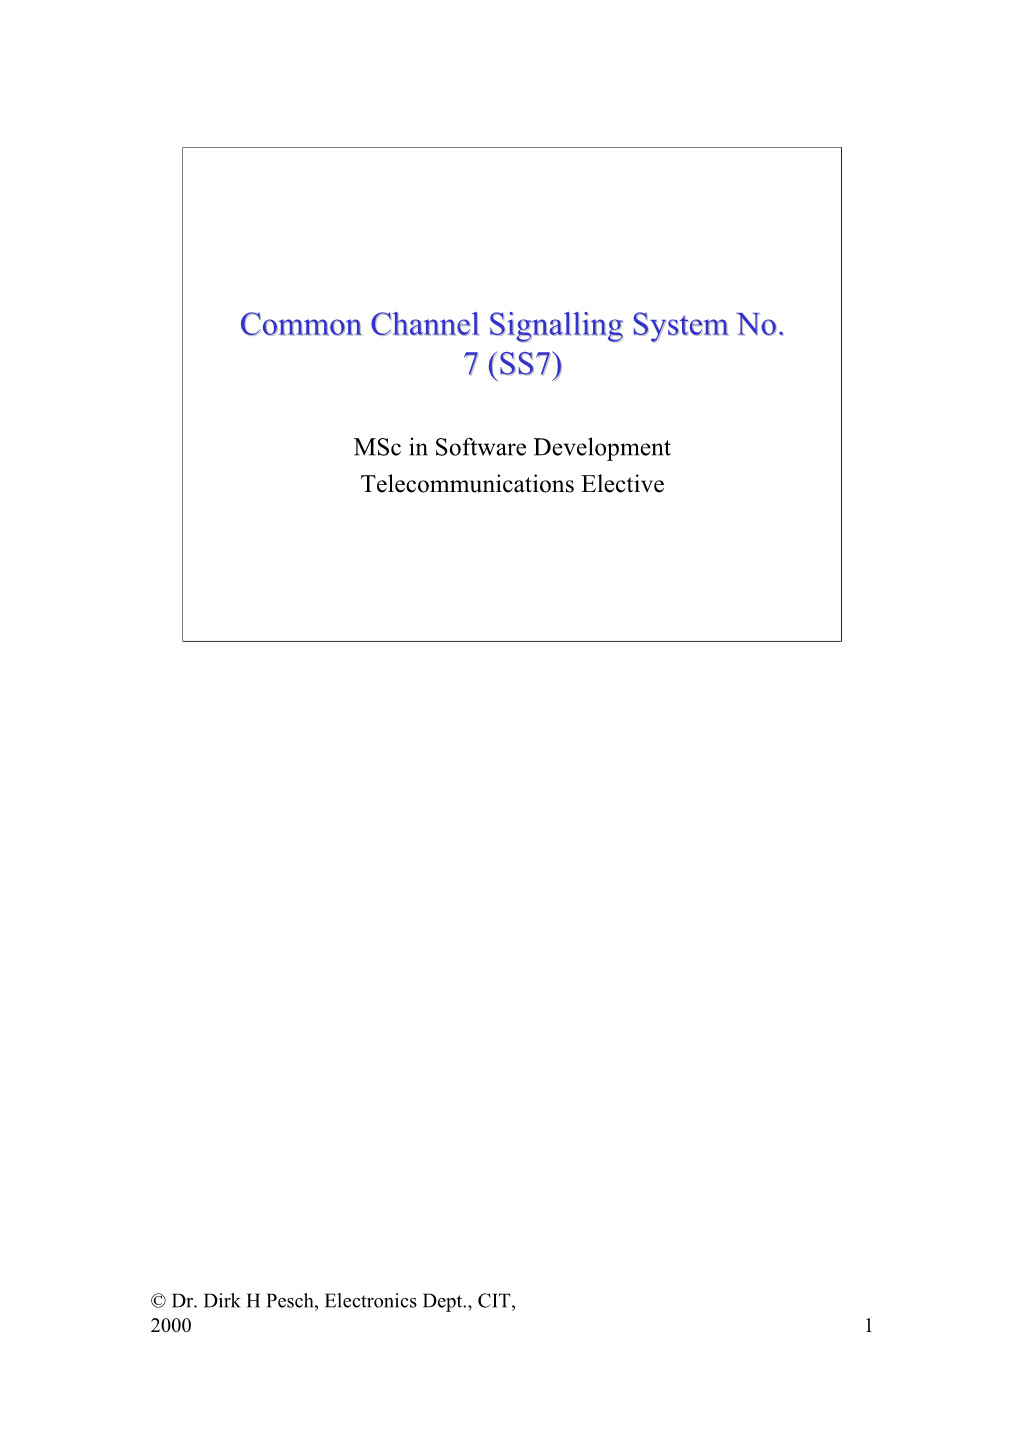 Common Channel Signalling System No. 7 (SS7)